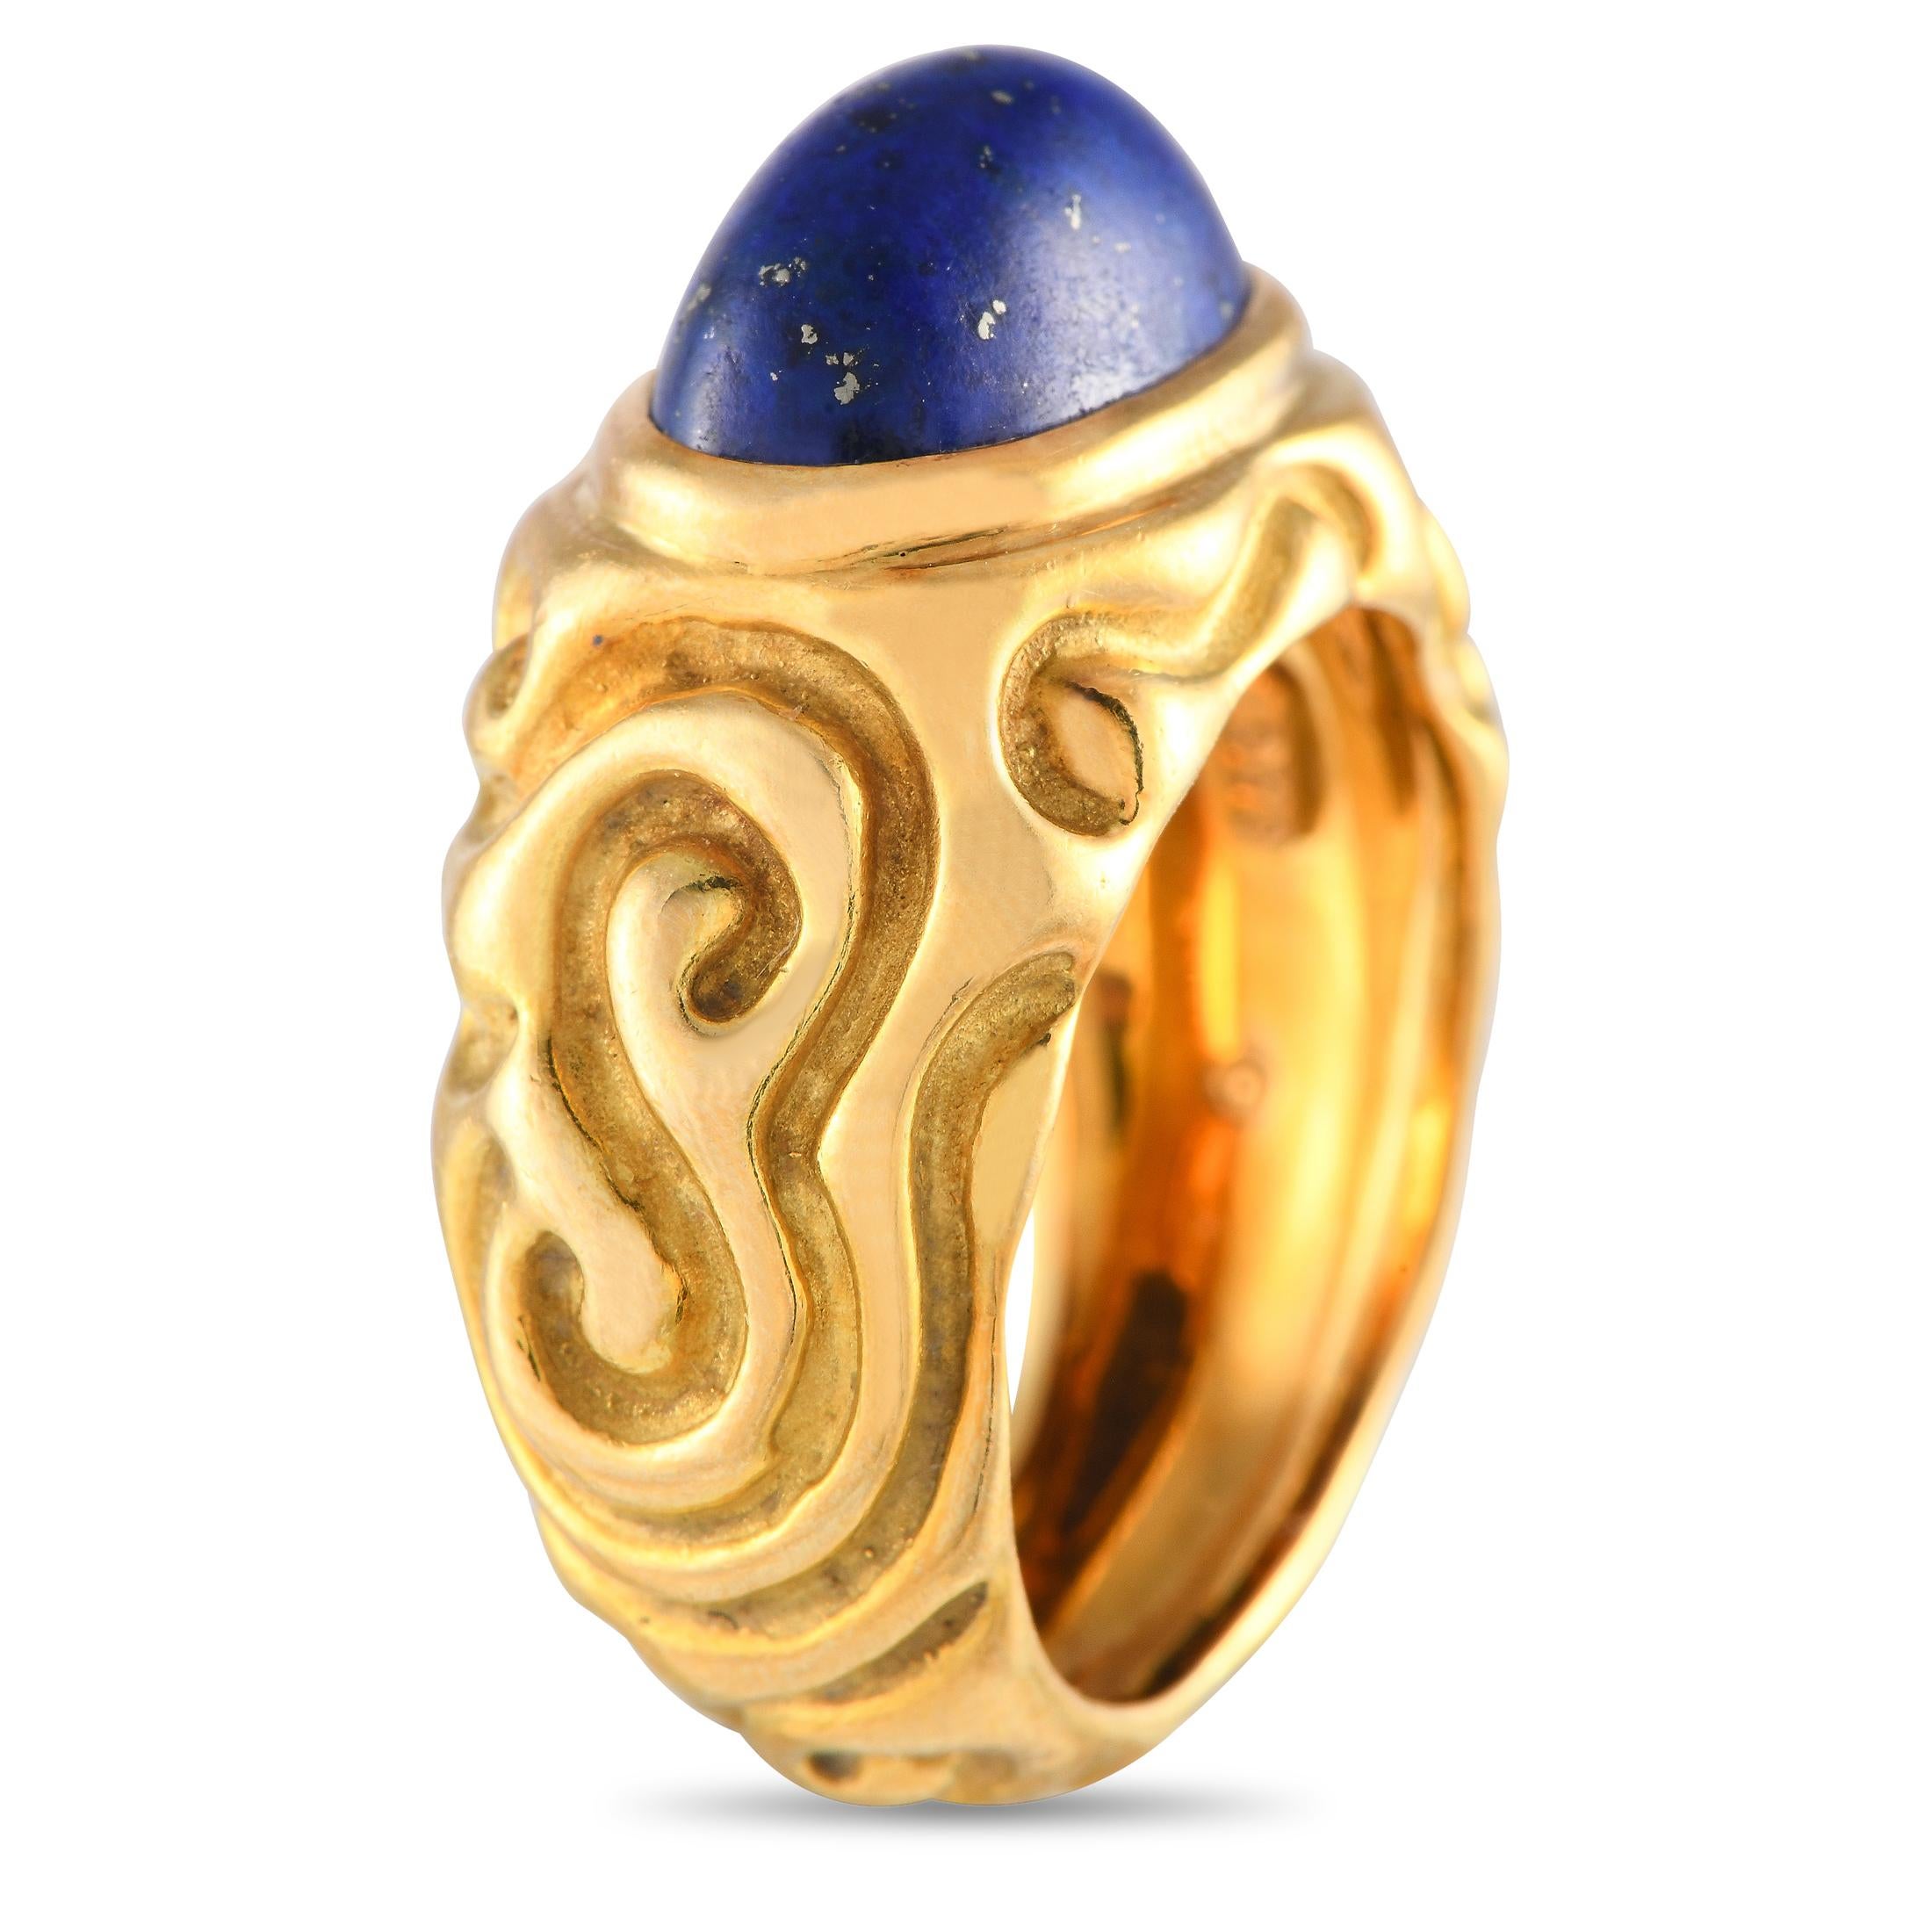 Here is a bold and striking cocktail ring from British master goldsmith and jewelry designer Elizabeth Gage. This handcrafted ornament of luxury features a solid yellow gold band with carved soft swirls and curved lines. An oval lapis lazuli